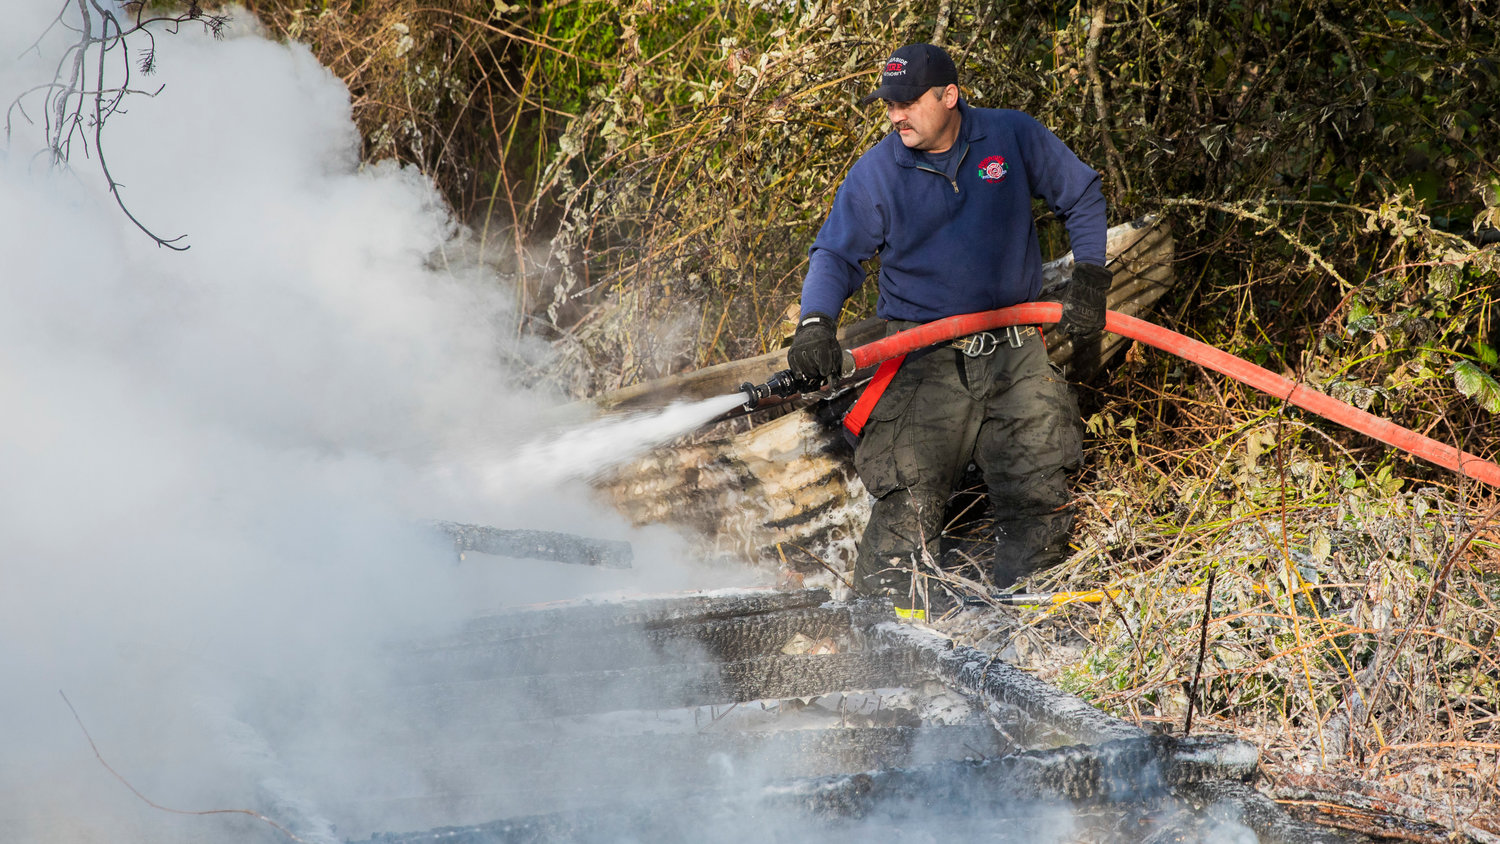 Crews from Riverside Fire Authority use hoses to extinguish flames that destroyed an outbuilding that was supposed to be unoccupied along Long Road in Centralia Thursday morning.